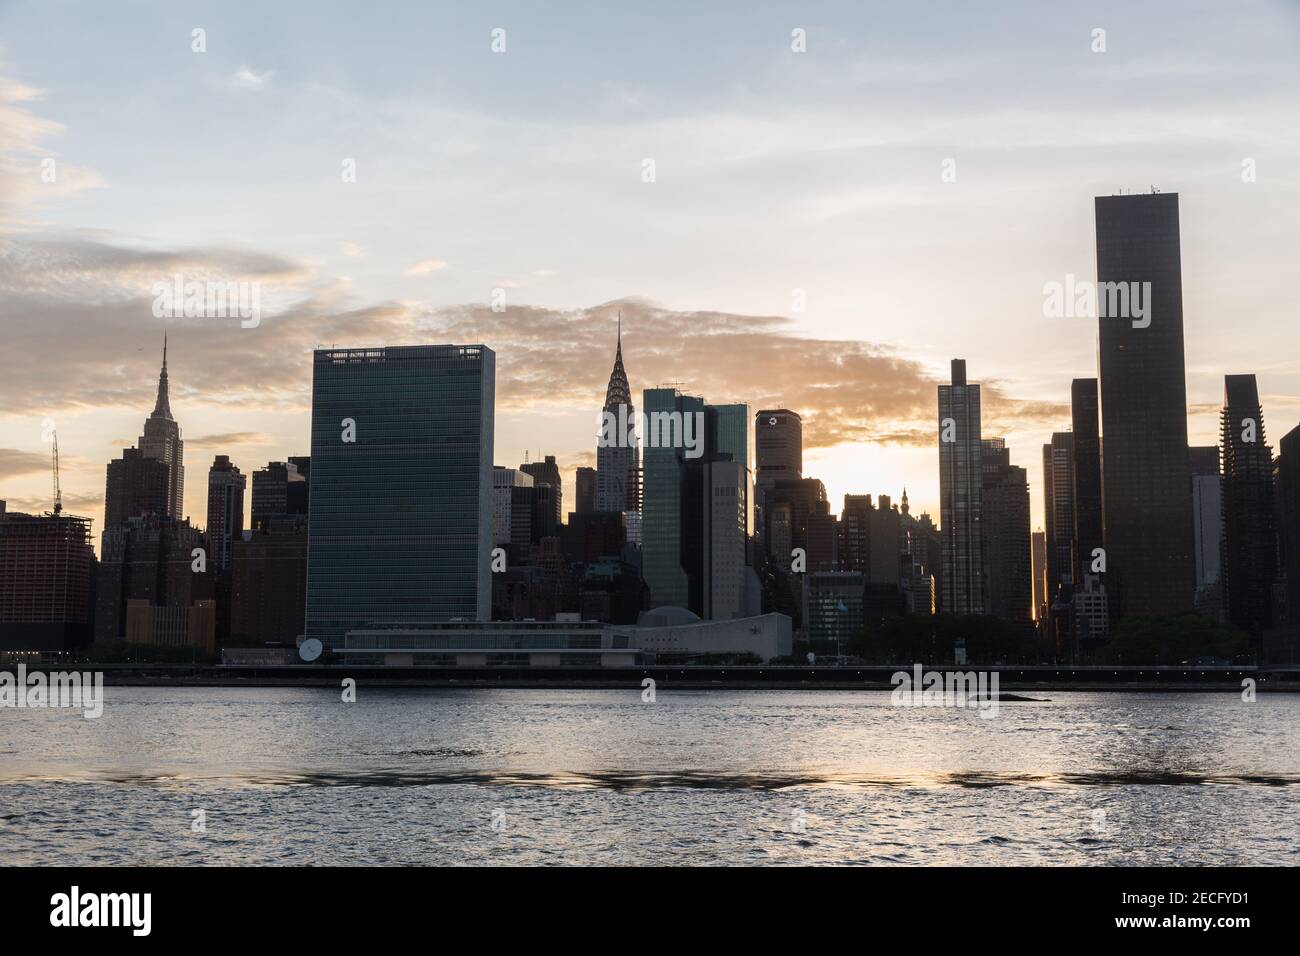 Directly across the East River from Long Island City is Midtown Manhattan with the Empire State Building, the Untied Nations, the Chrysler Building am Stock Photo